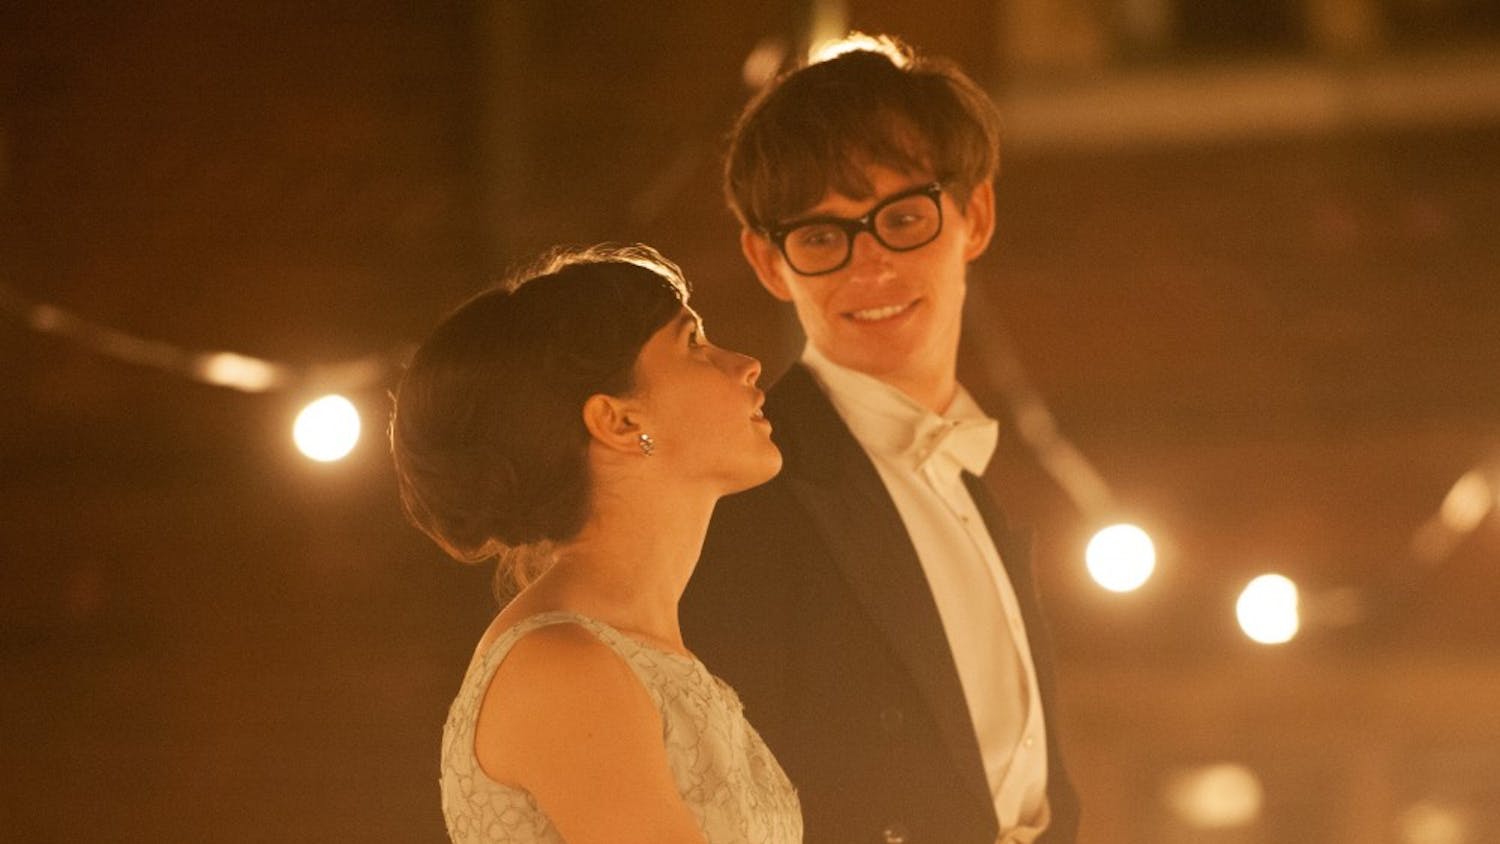 TTOE_D04_01827_R_CROP  (L to R) Felicity Jones stars as Jane Wilde and Eddie Redmayne stars as Stephen Hawking in Academy Award winner James Marsh’s THE THEORY OF EVERYTHING, a Focus Features release.

Photo Credit:  Liam Daniel / Focus Features
